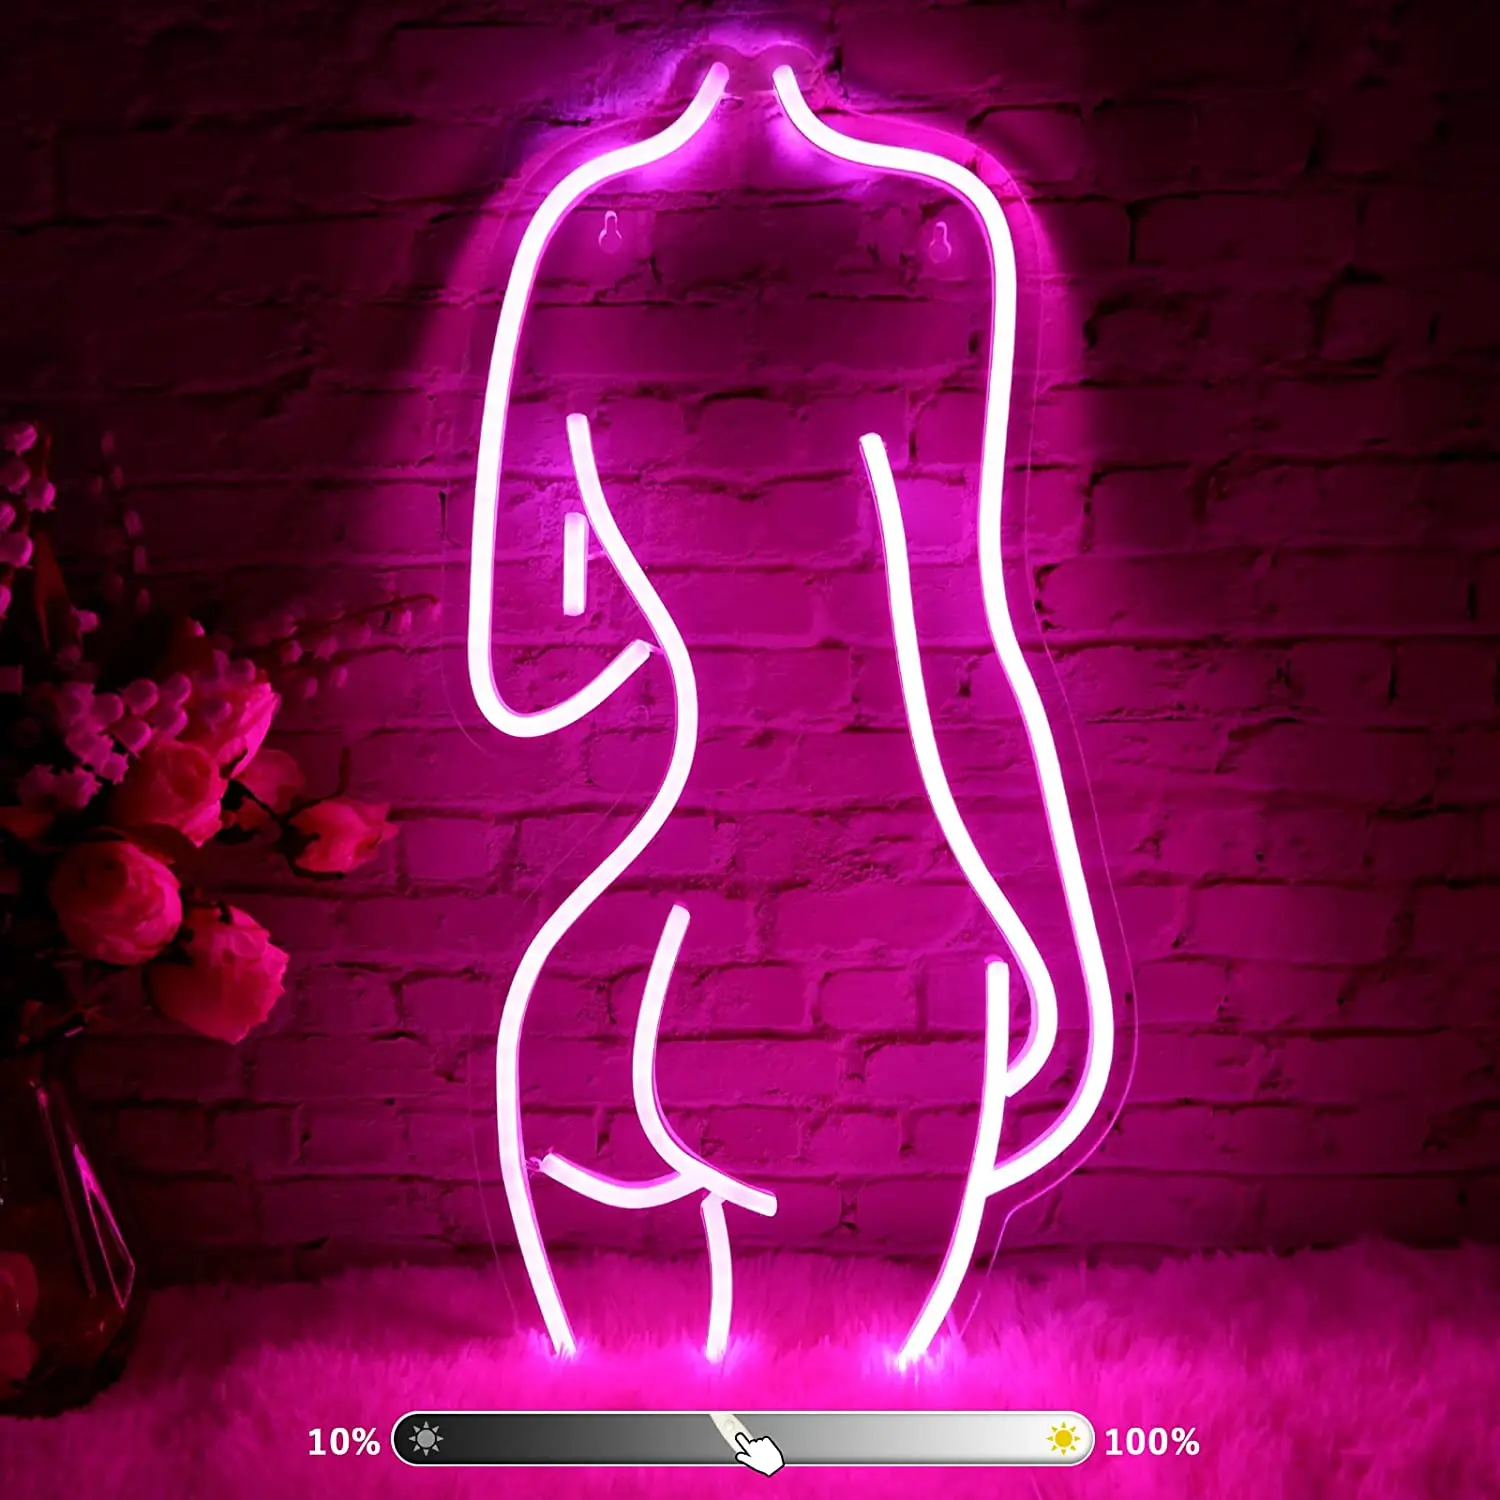 Lady Neon lights,Neon Sign for Wall Decor,Led Signs for Bedroom,Bar Signs,Acrylic USB Powered Suitable for Living Room,Bar Party